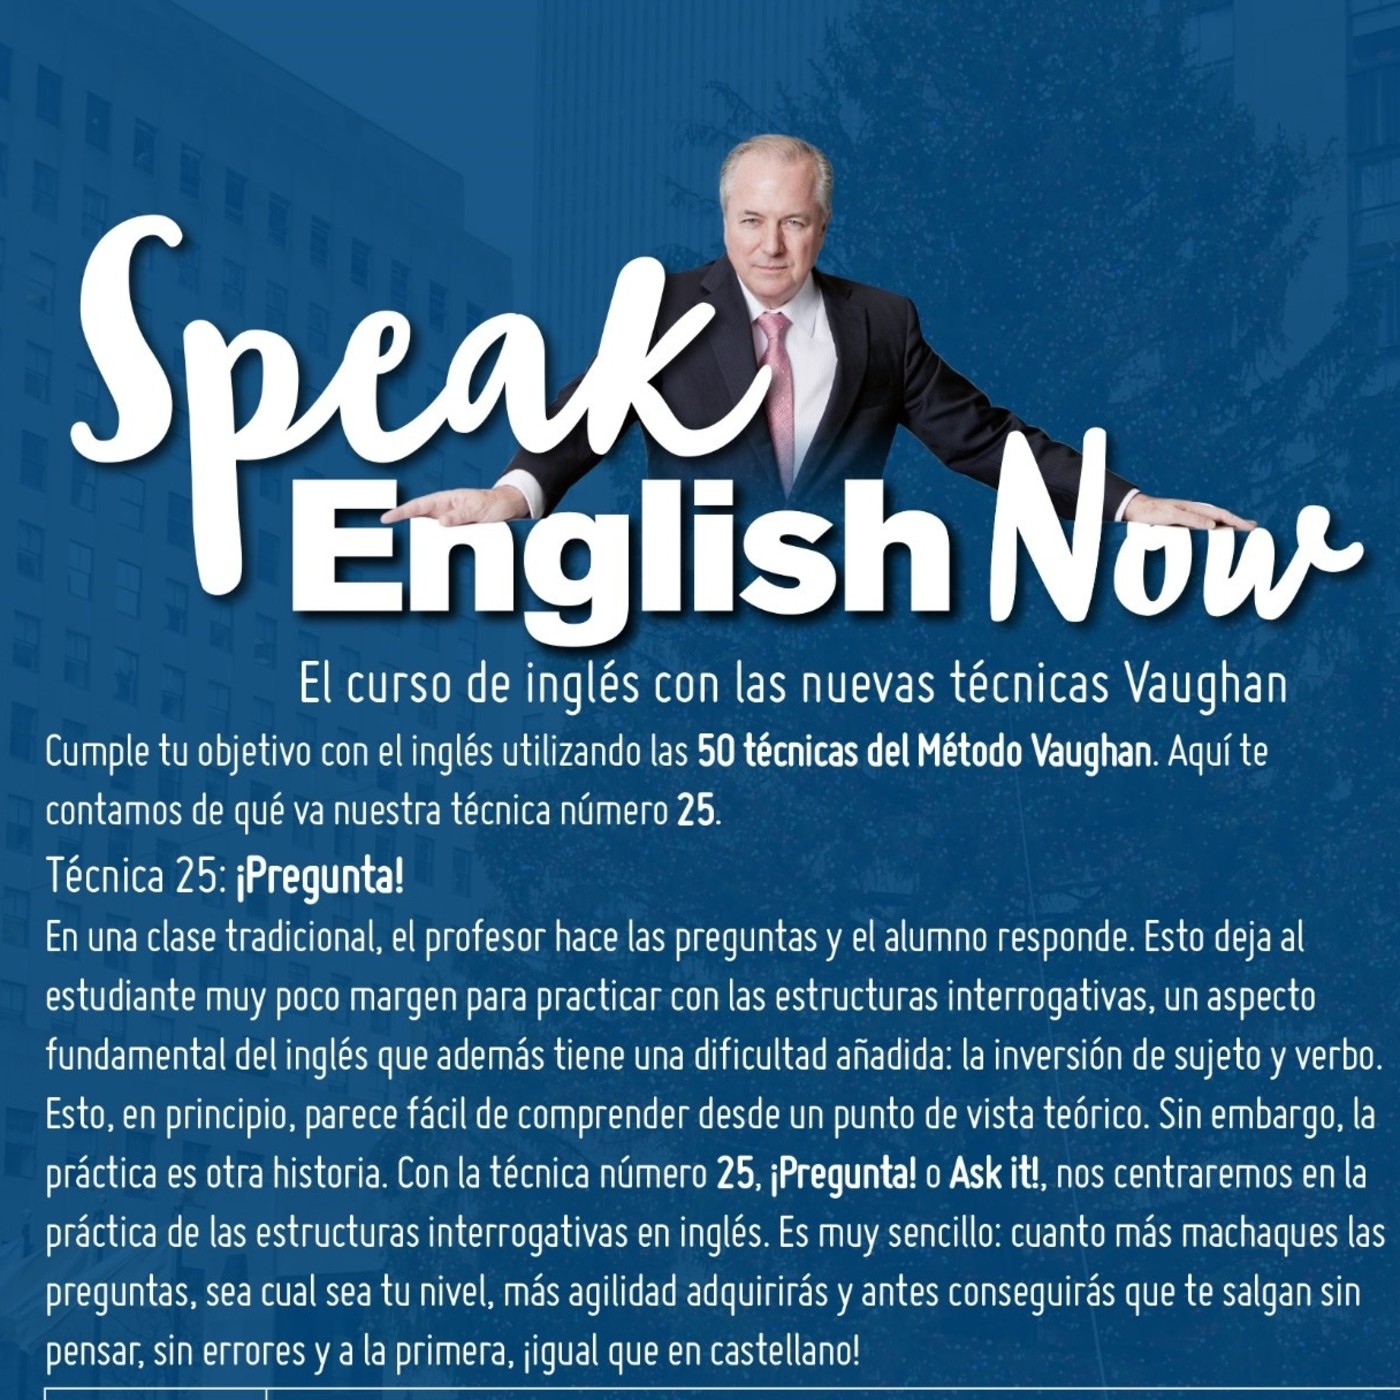 Speak English Now by Vaughan Libro 10